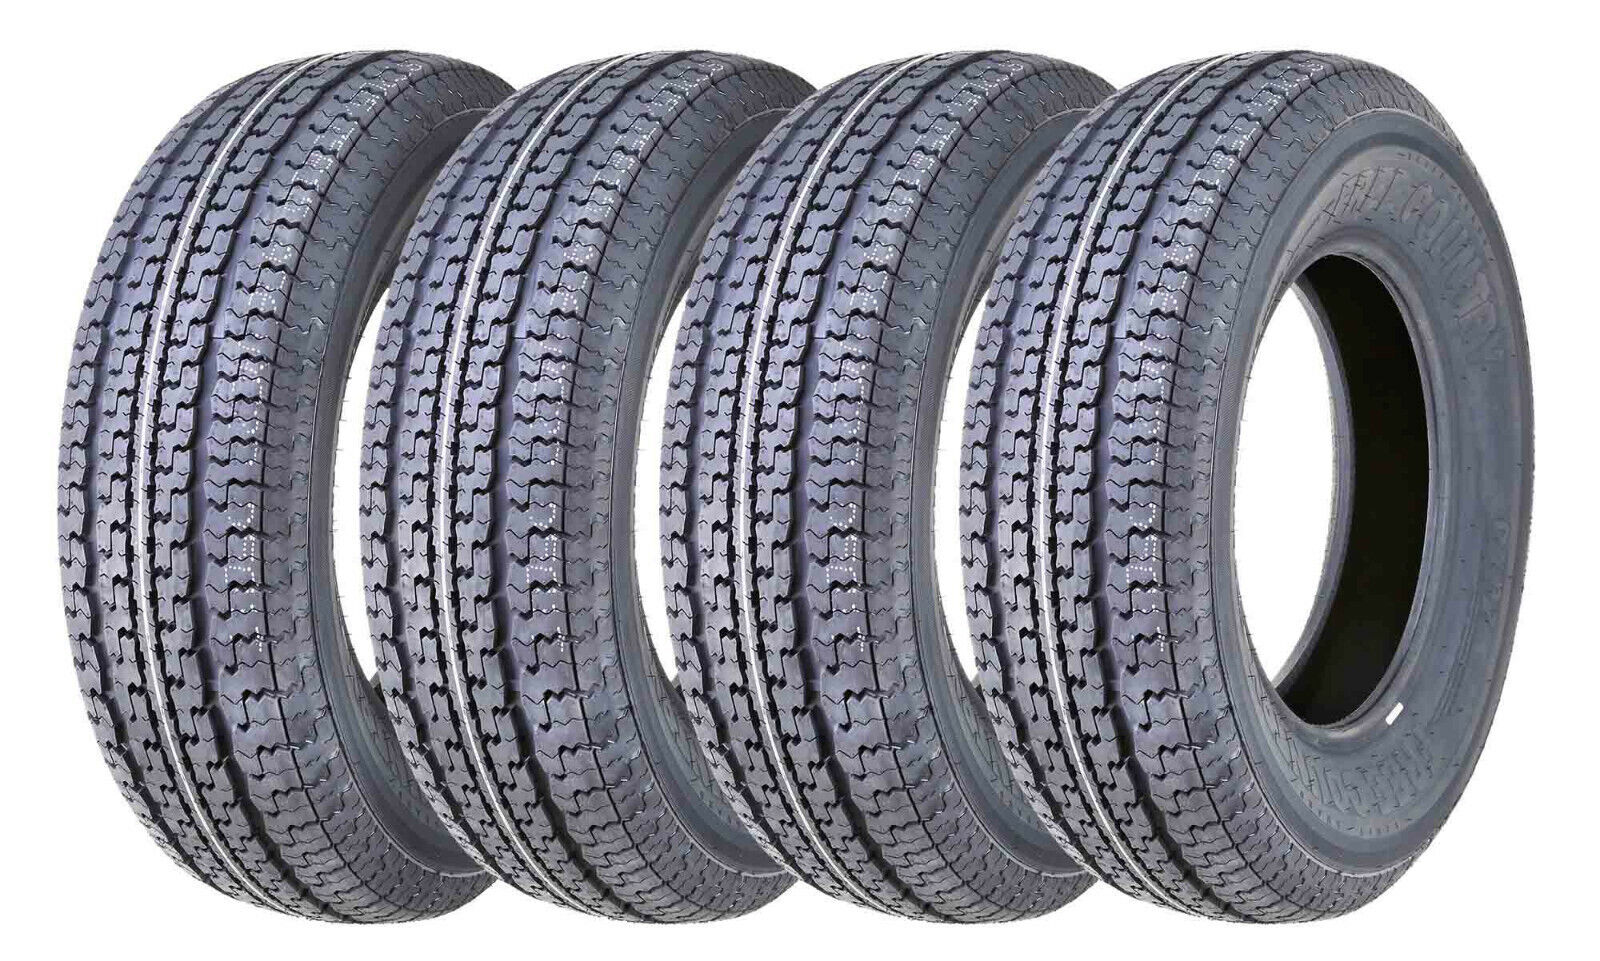 2PC FREE COUNTRY ST205/75R15 Trailer Tires 205 75 15 10PR Radial LRE Heavy Duty